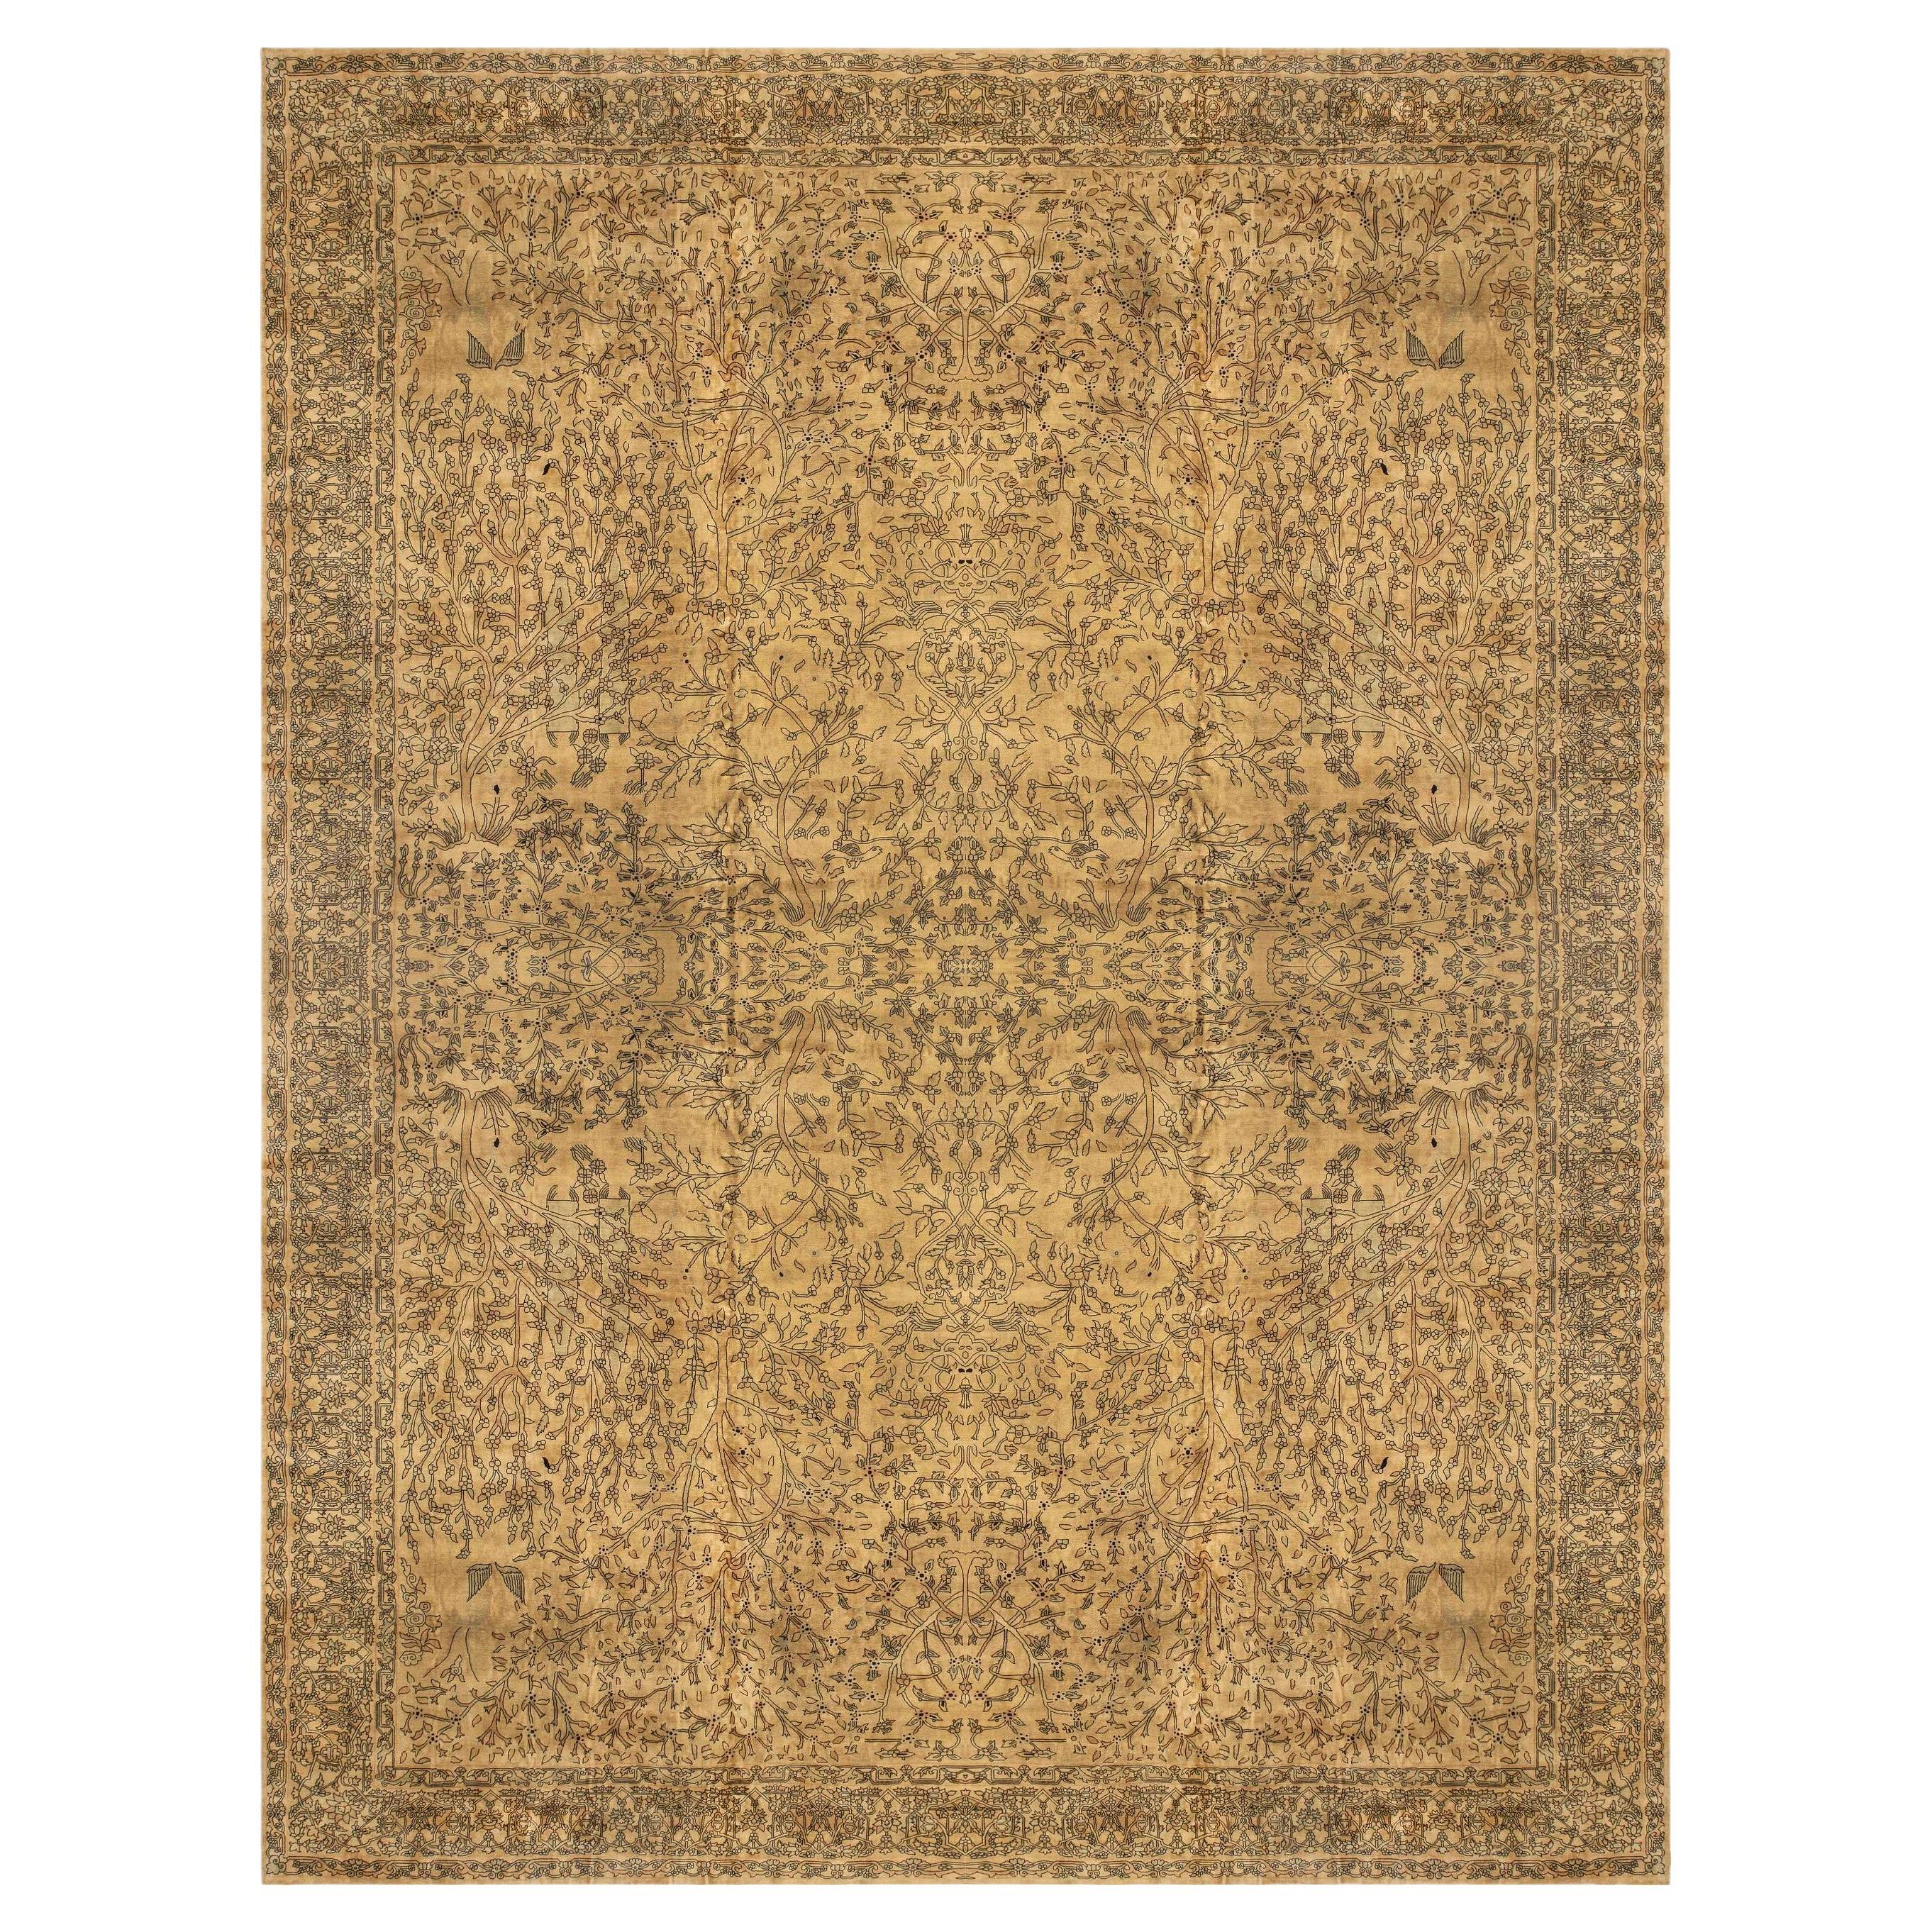 Early 20th Century North Indian Botanic Wool Rug For Sale